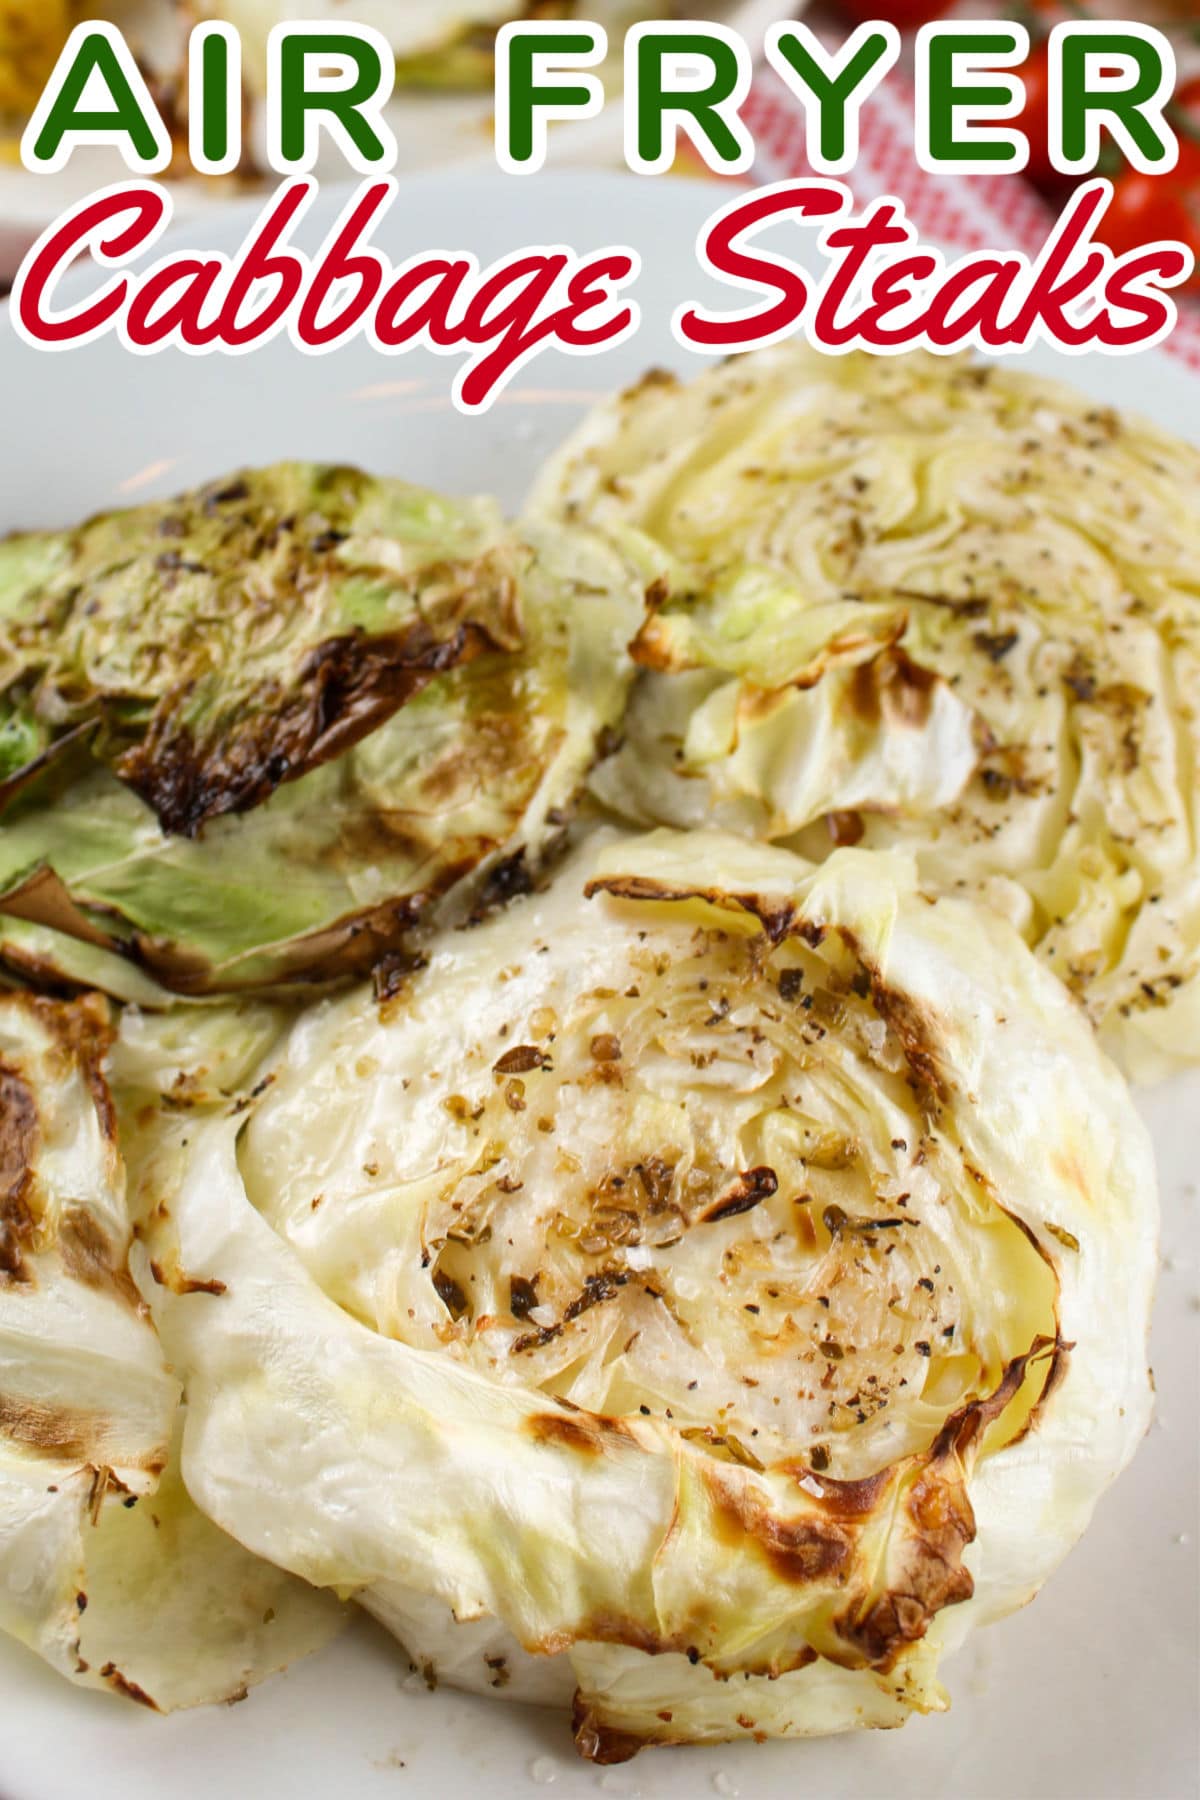 Air Fryer Cabbage Steaks are one of the healthiest side dishes you can make and they are done in 10 minutes! I dabbed on just a bit of my favorite salad dressing to make them even tastier.  via @foodhussy